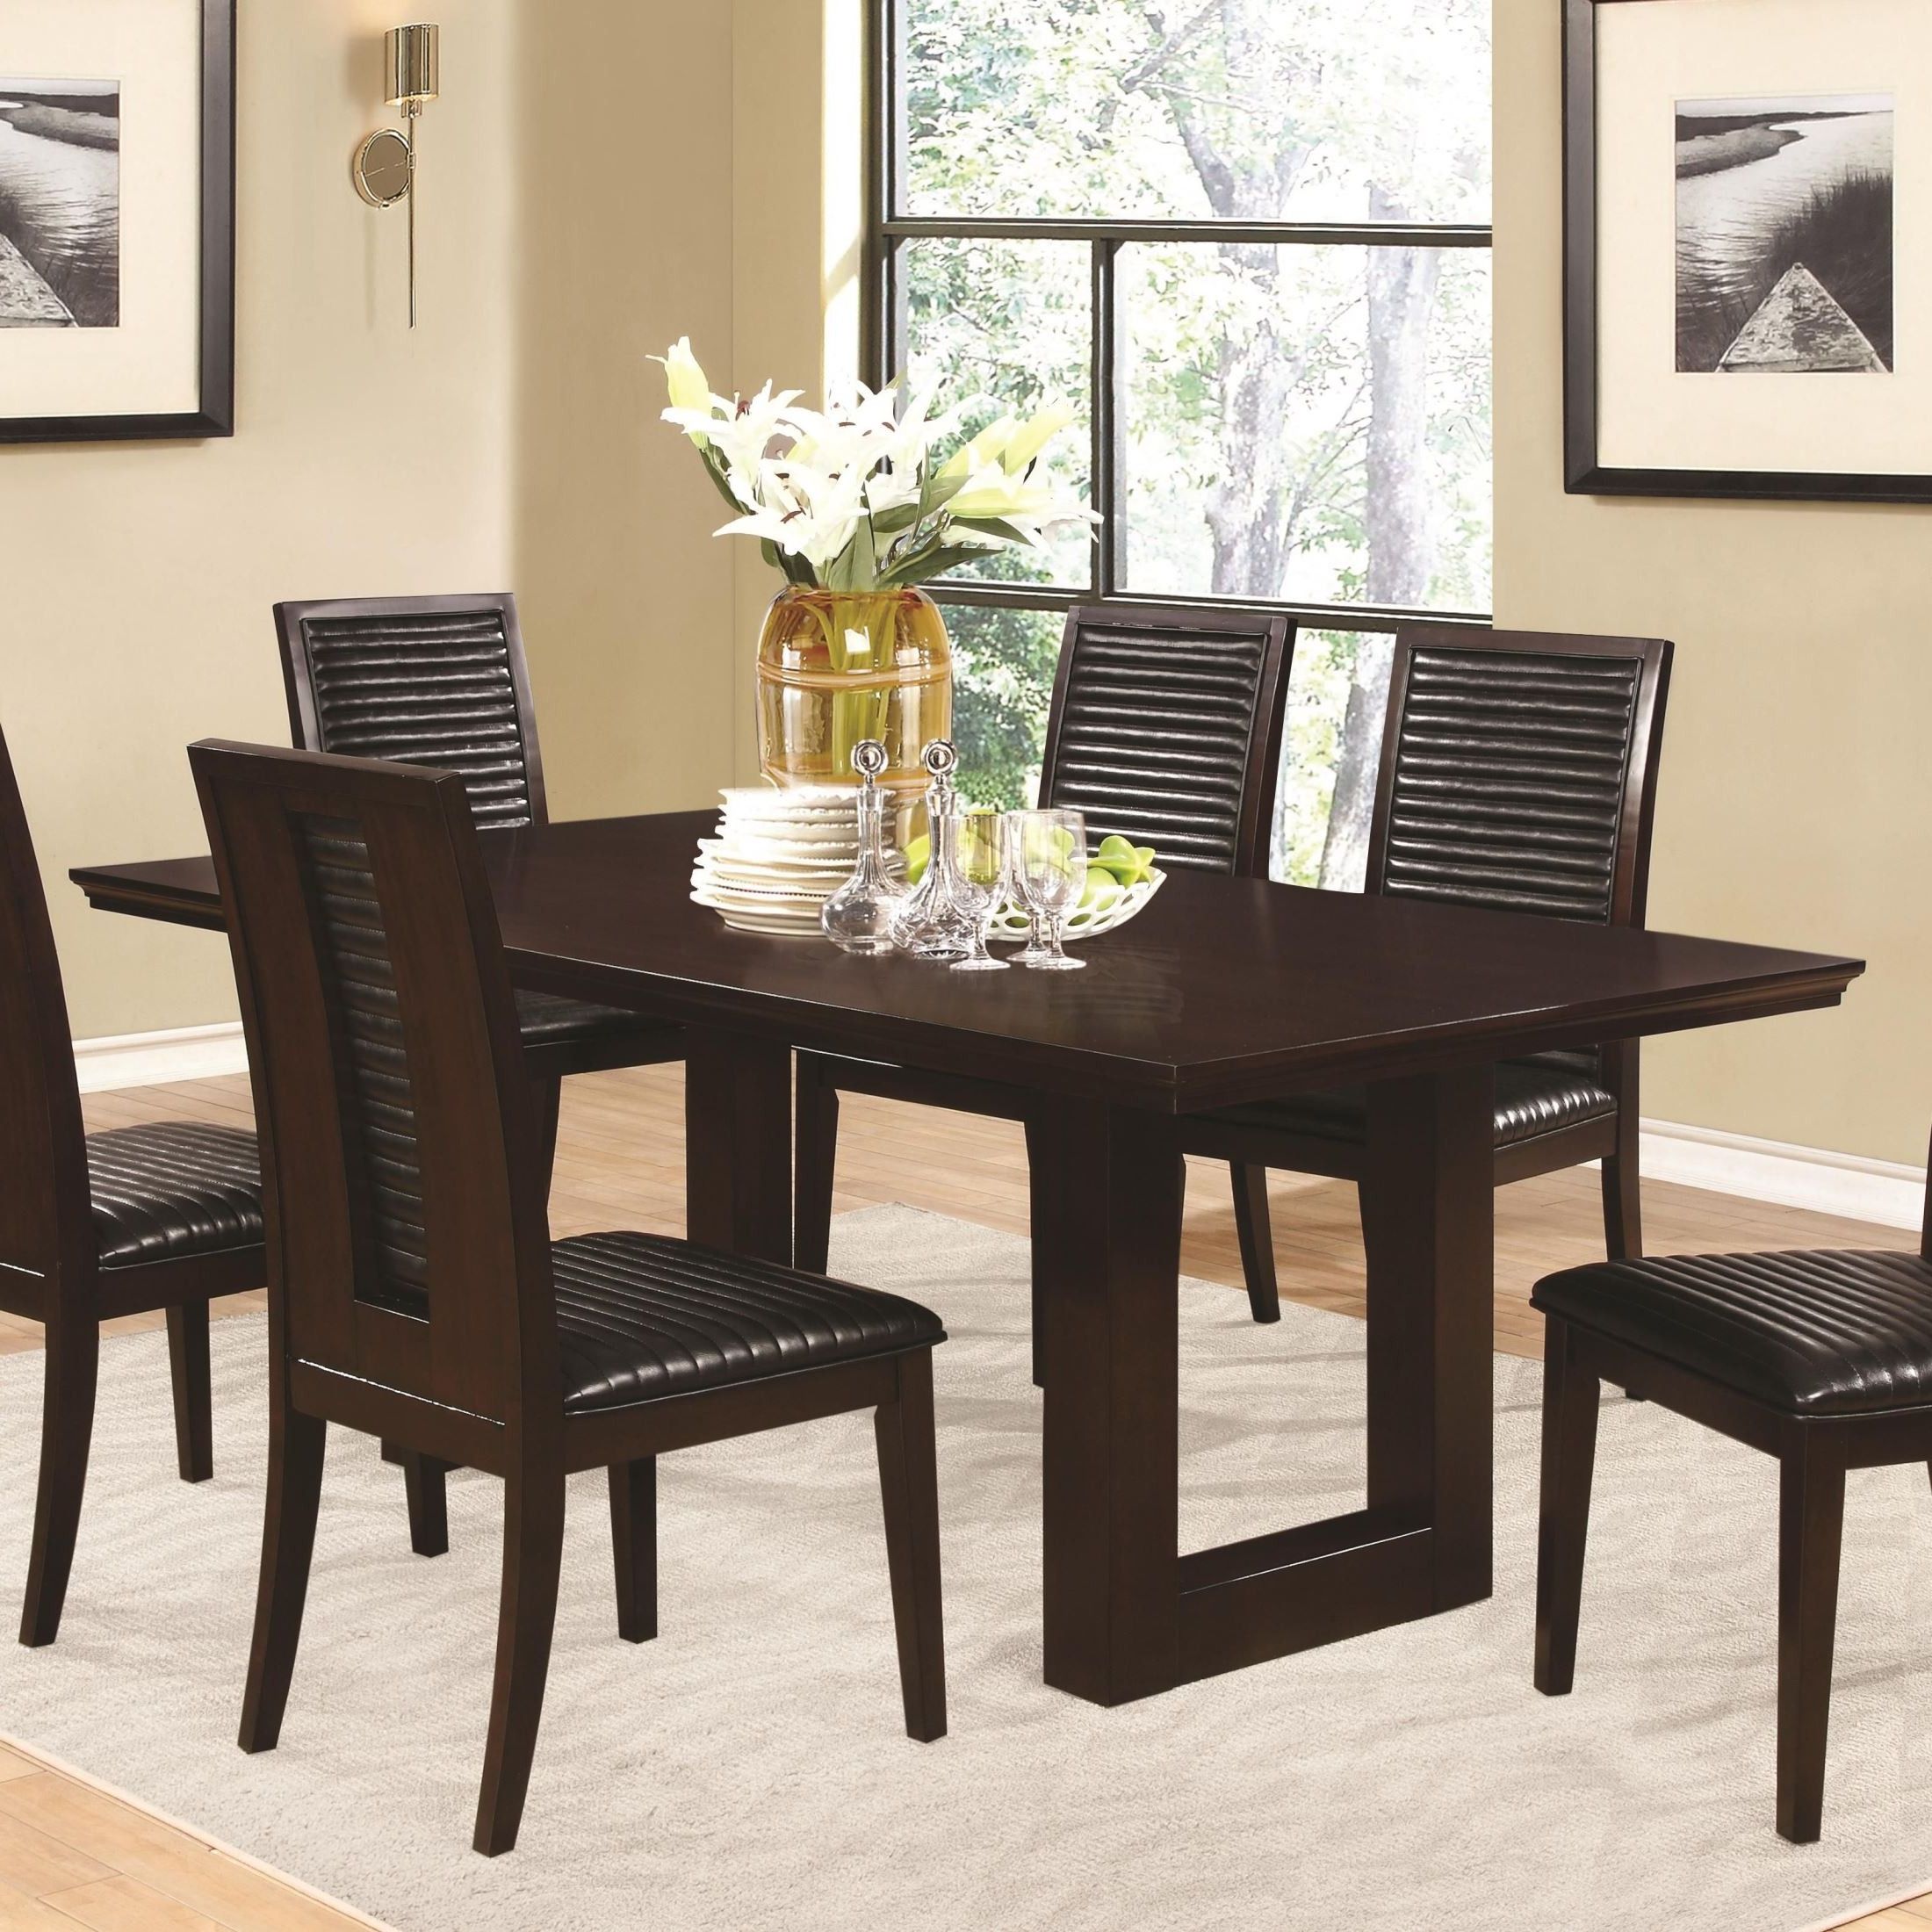 28'' Pedestal Dining Tables Regarding 2019 Chester Rectangular Pedestal Dining Table From Coaster (View 18 of 20)